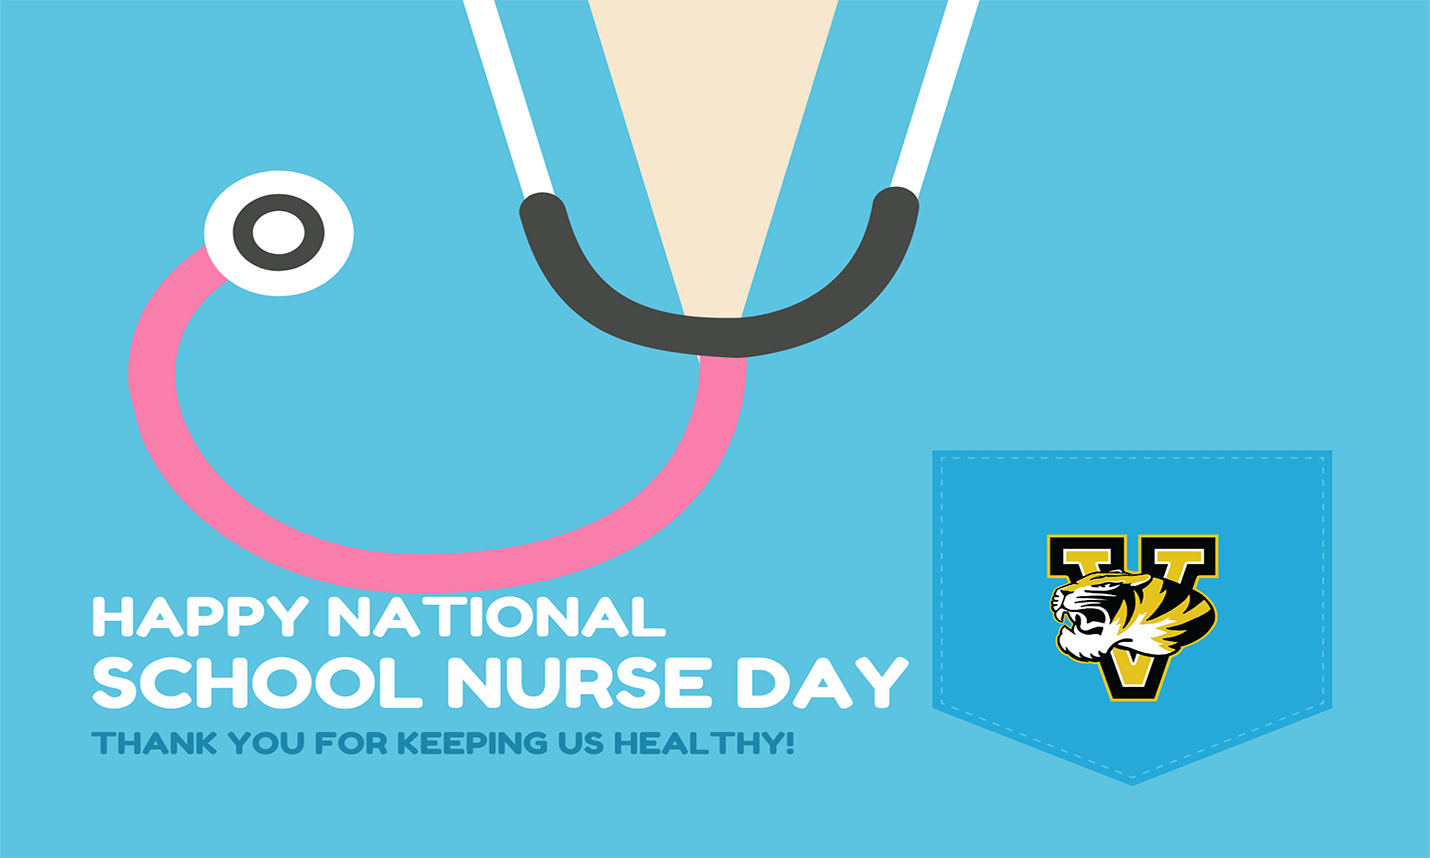 Happy National School Nurse Day - Thank you for keeping us healthy!